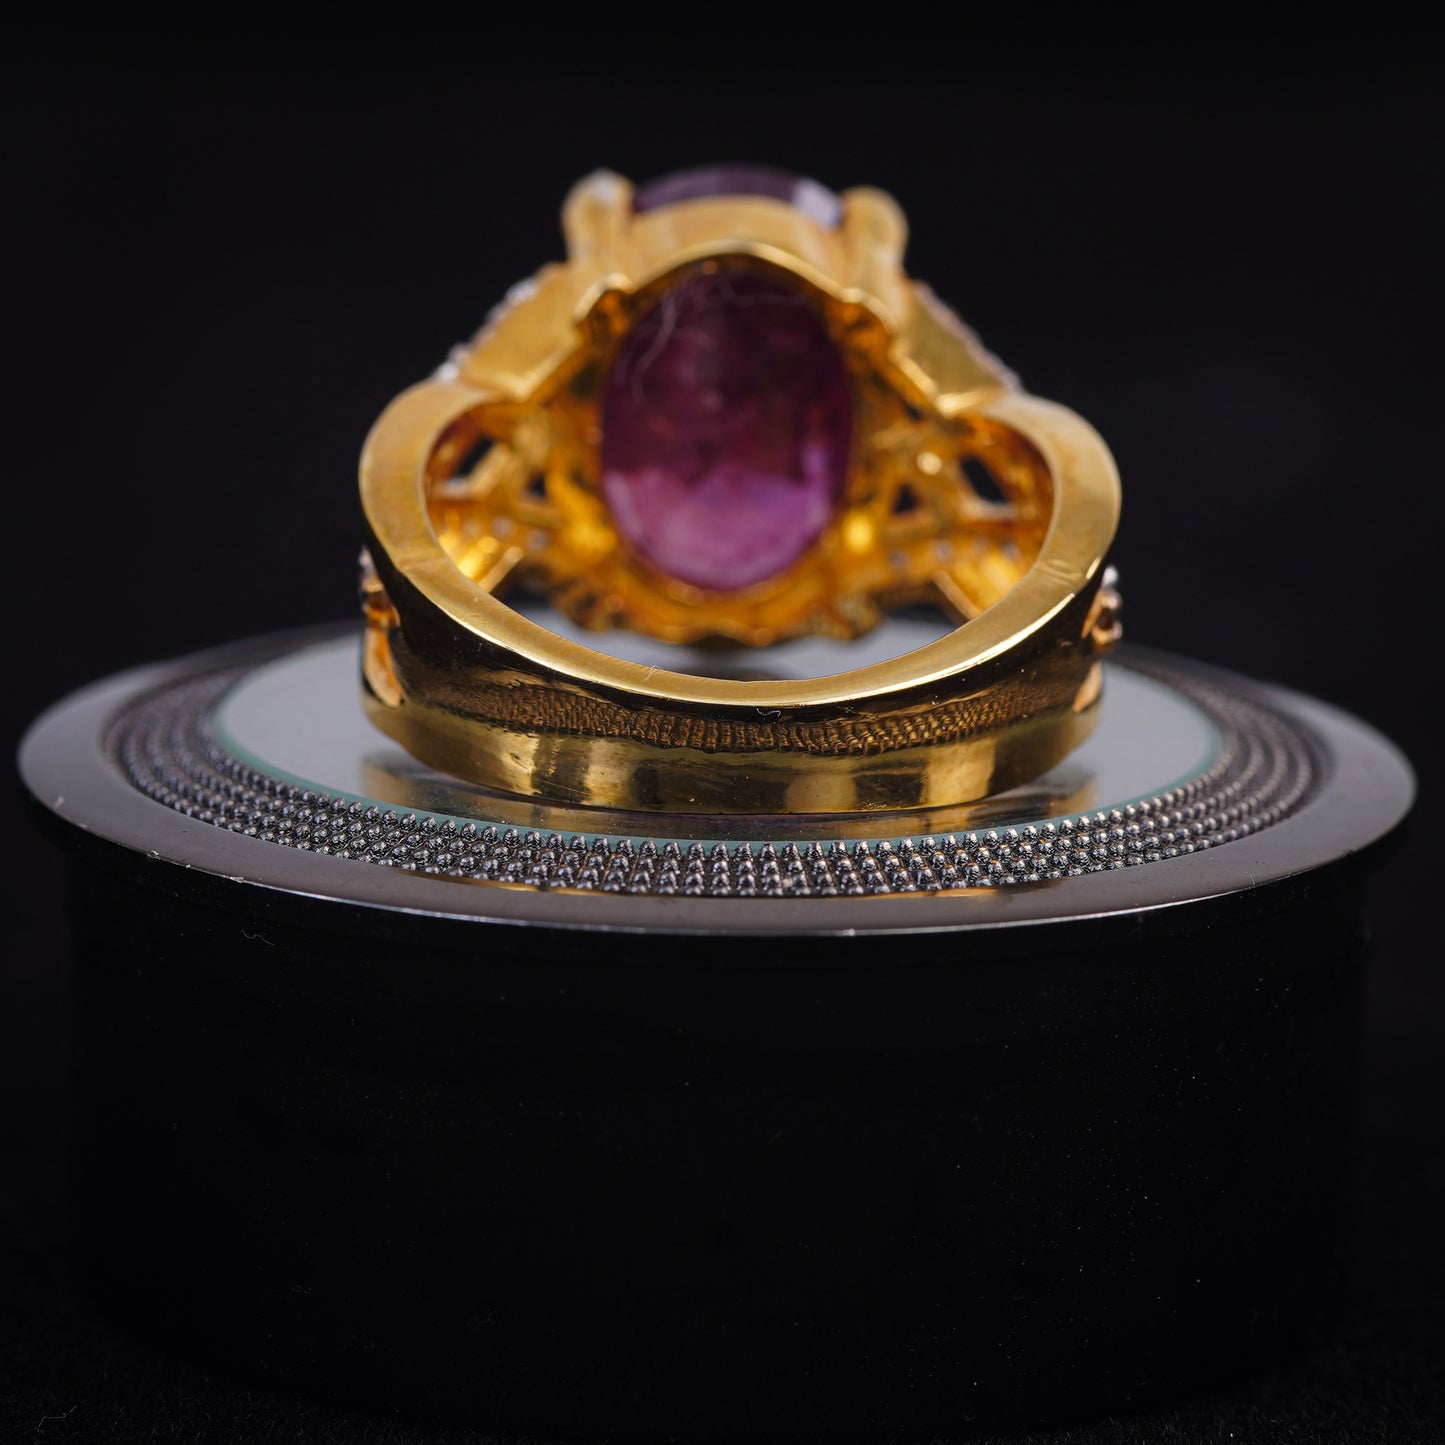 Buy natural Ruby grade 1 South African, female ring gold coated